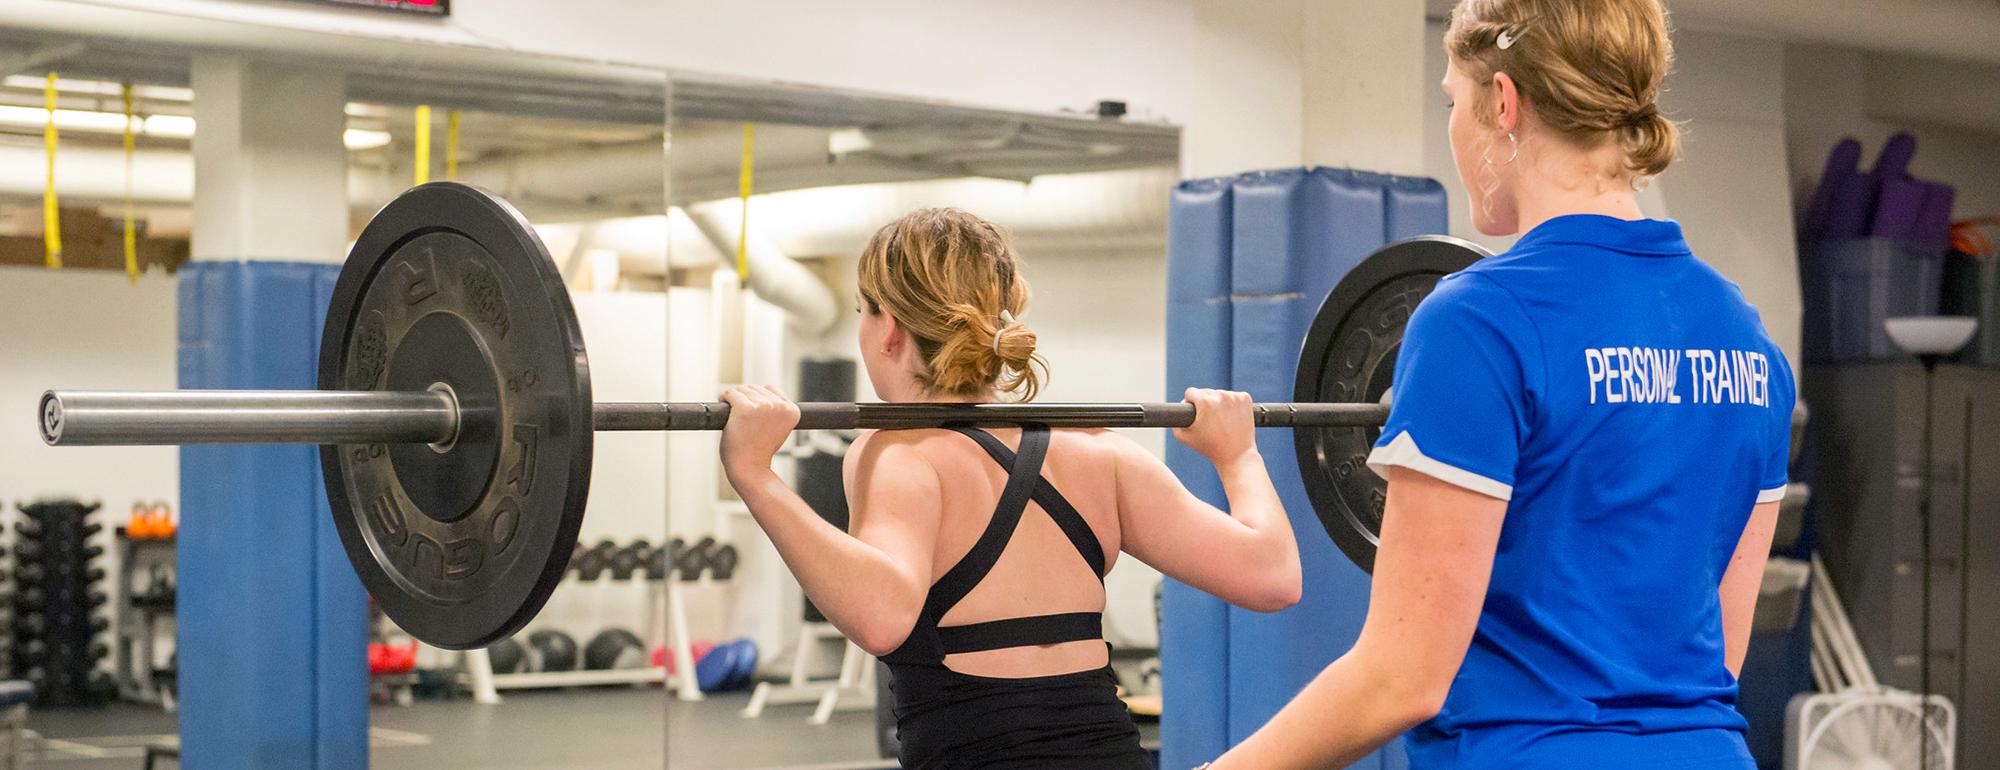 Personal trainer stands behind woman lifting weights